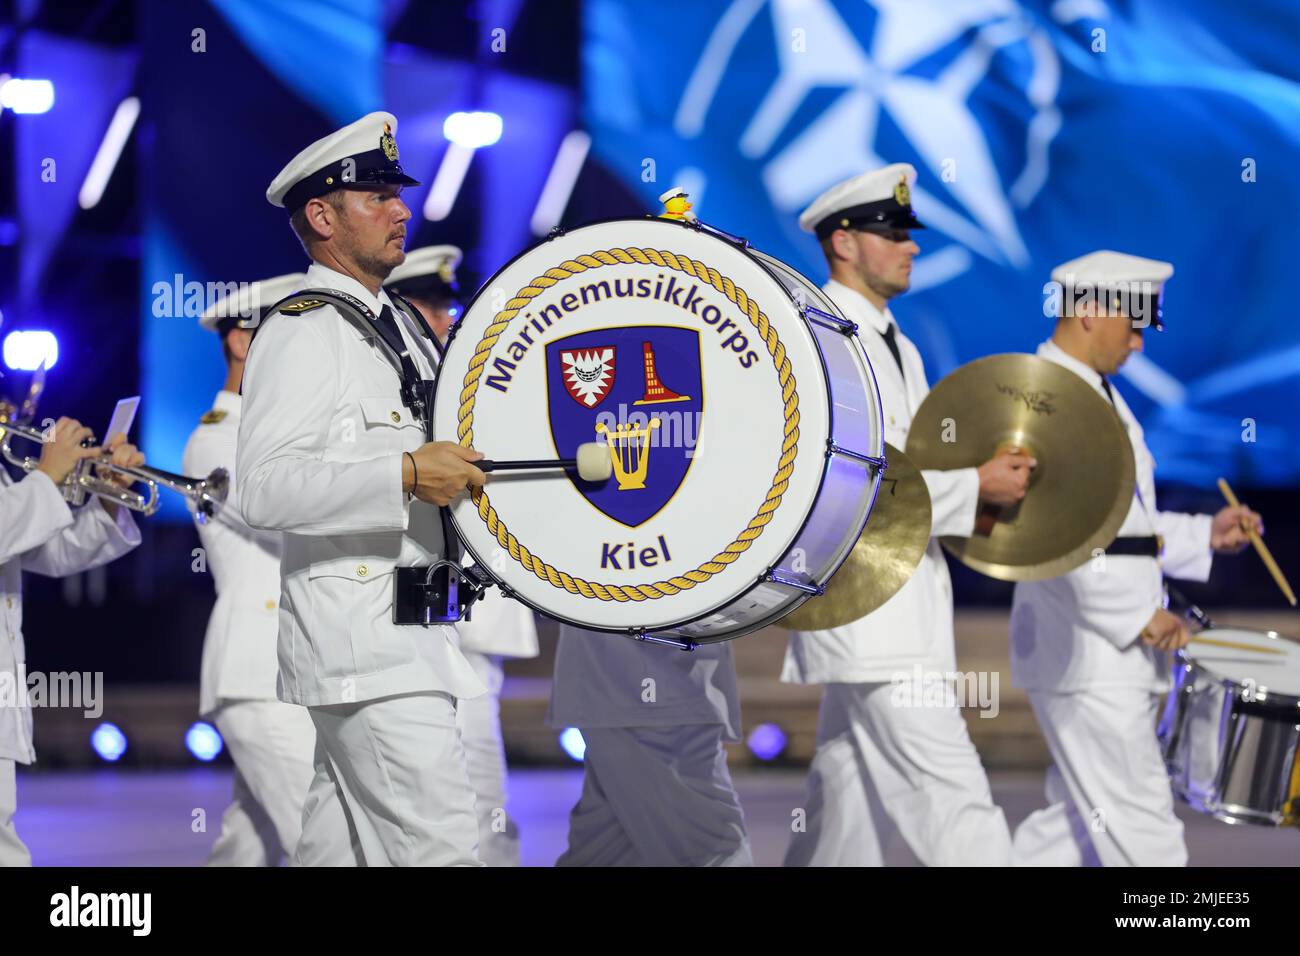 A German sailor marches during the inaugural military tattoo at Vilnius, Lithuania, Aug. 27, 2022. Lithuania invited allied nations to a military tattoo for the first time in its history, including the 1st Infantry Division Band. Stock Photo